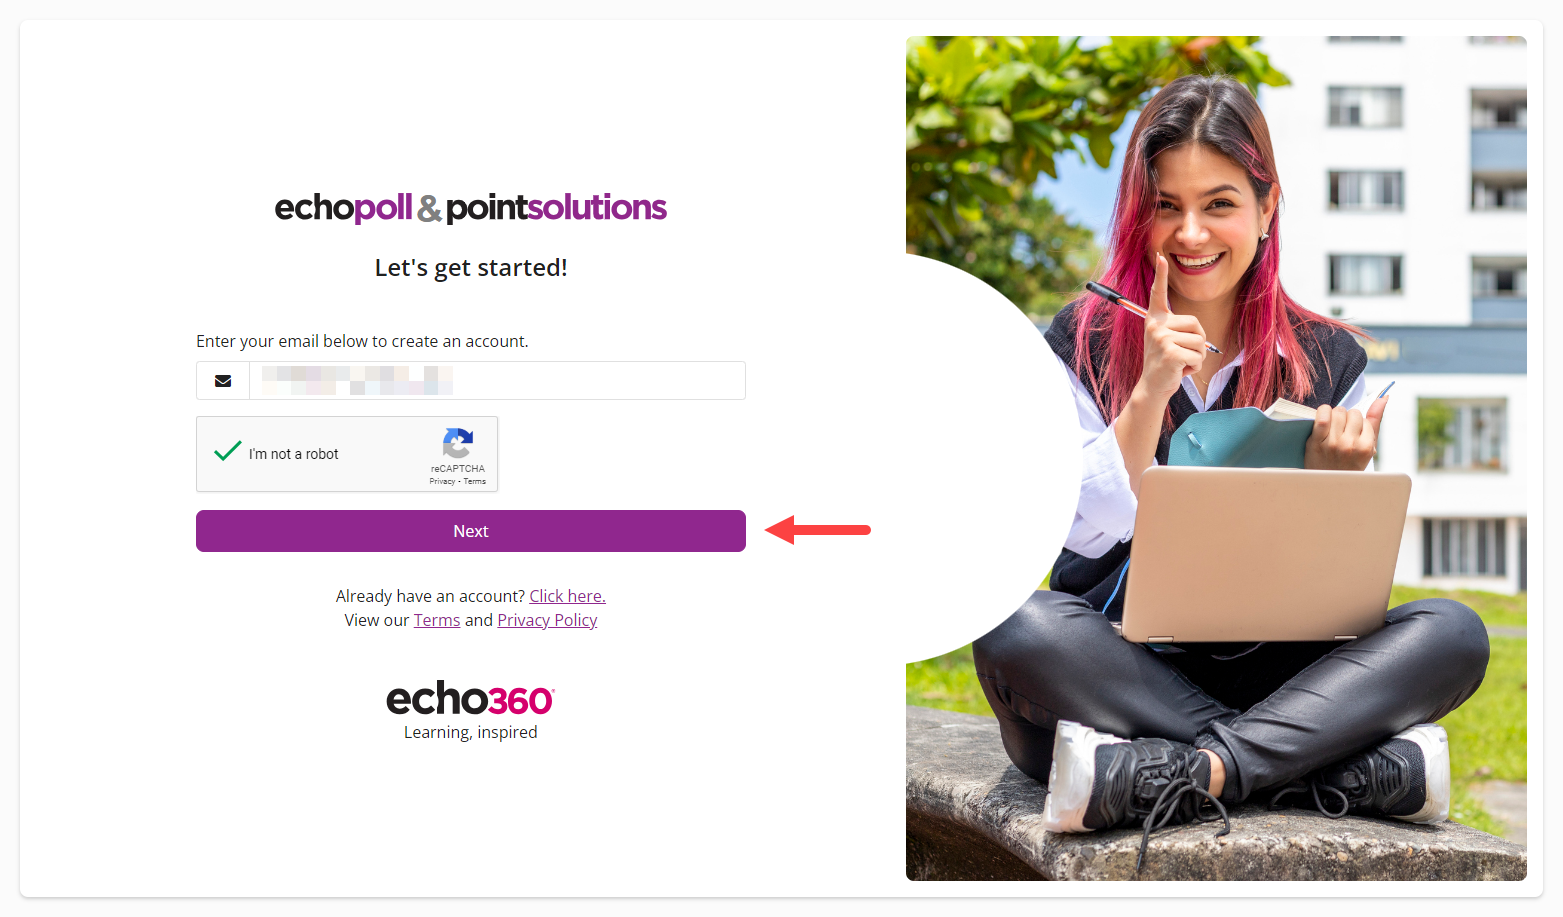 The EchoPoll and PointSolutions account creation screen prompting for your email address and completed reCAPTCHA with Next button identified